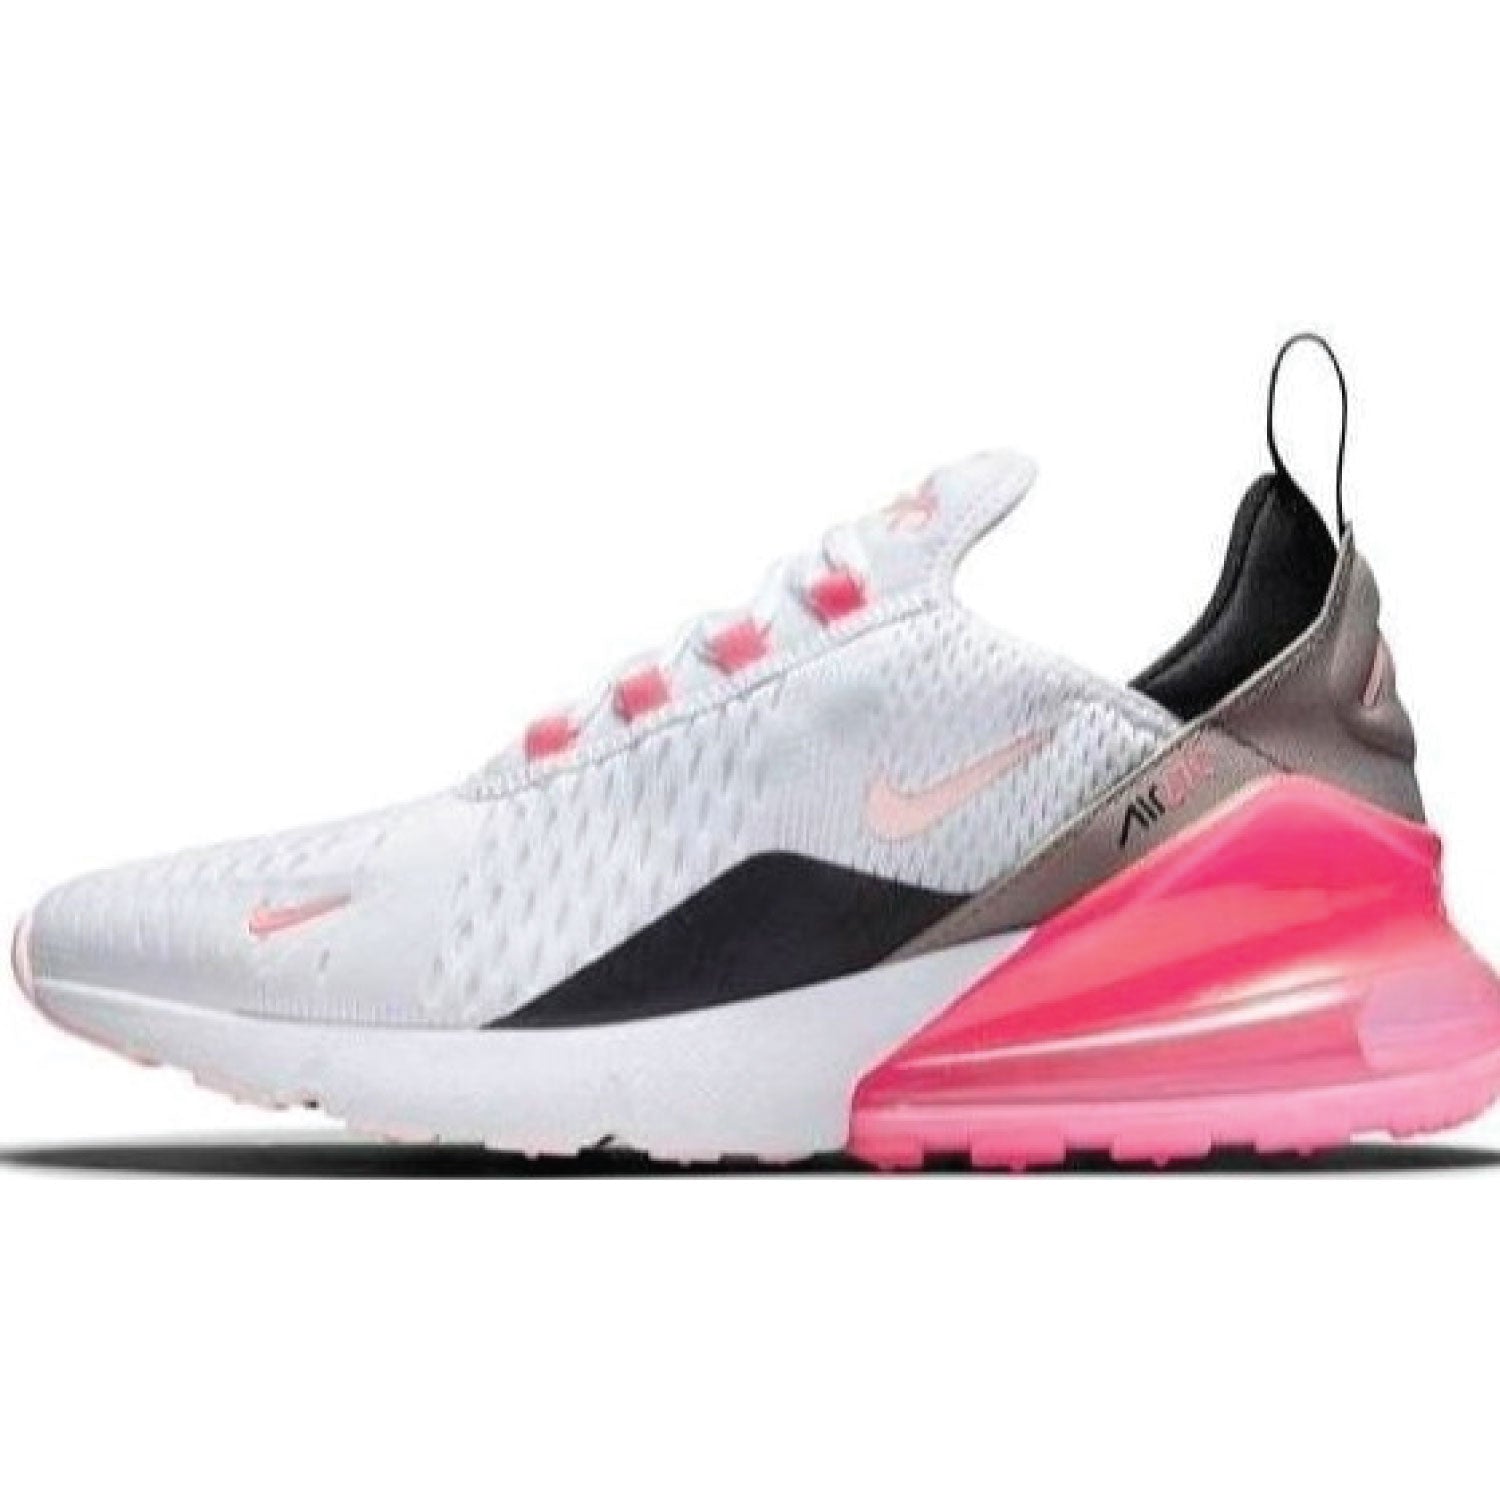 Wmns Air Max 270 Essential 'White Arctic Punch' Trainers Nike 5.5 UK White Arctic Punch 